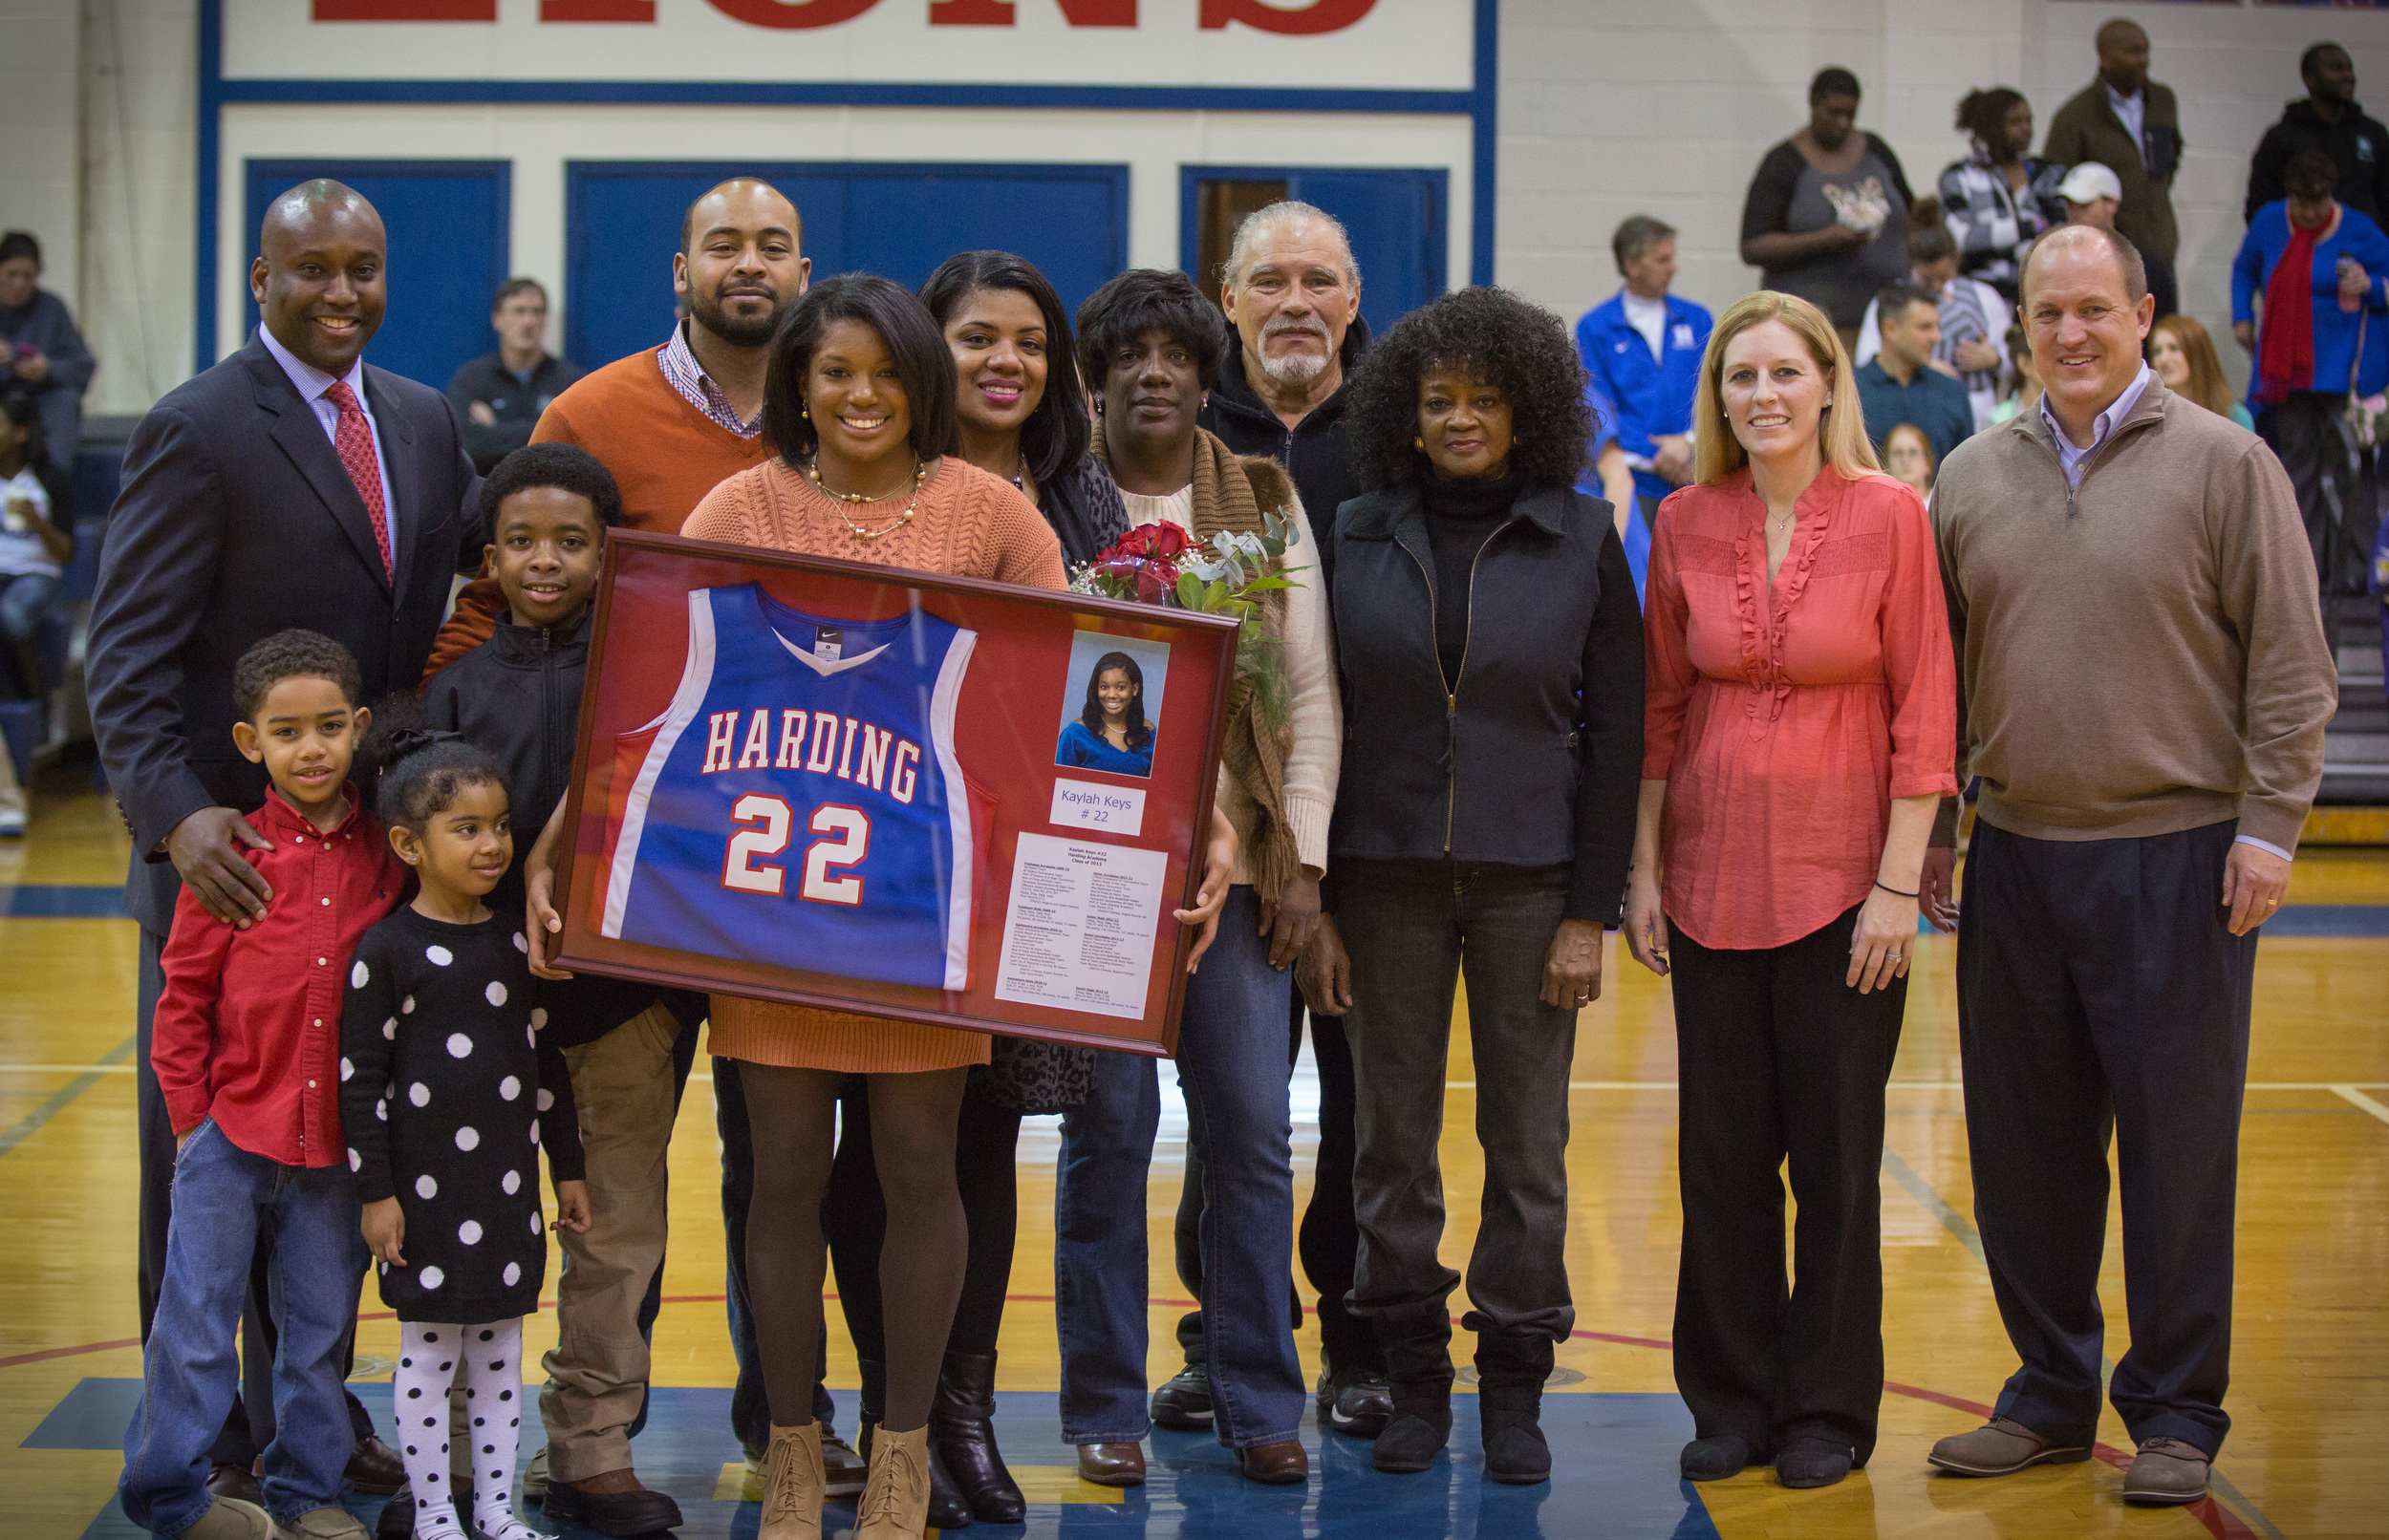 Retirement presentation at Harding Academy - Kaylah and her family, Coach Kevin Starks (far left) Coach Becky Starks (far right) and school president, Trent Williamson (far right).